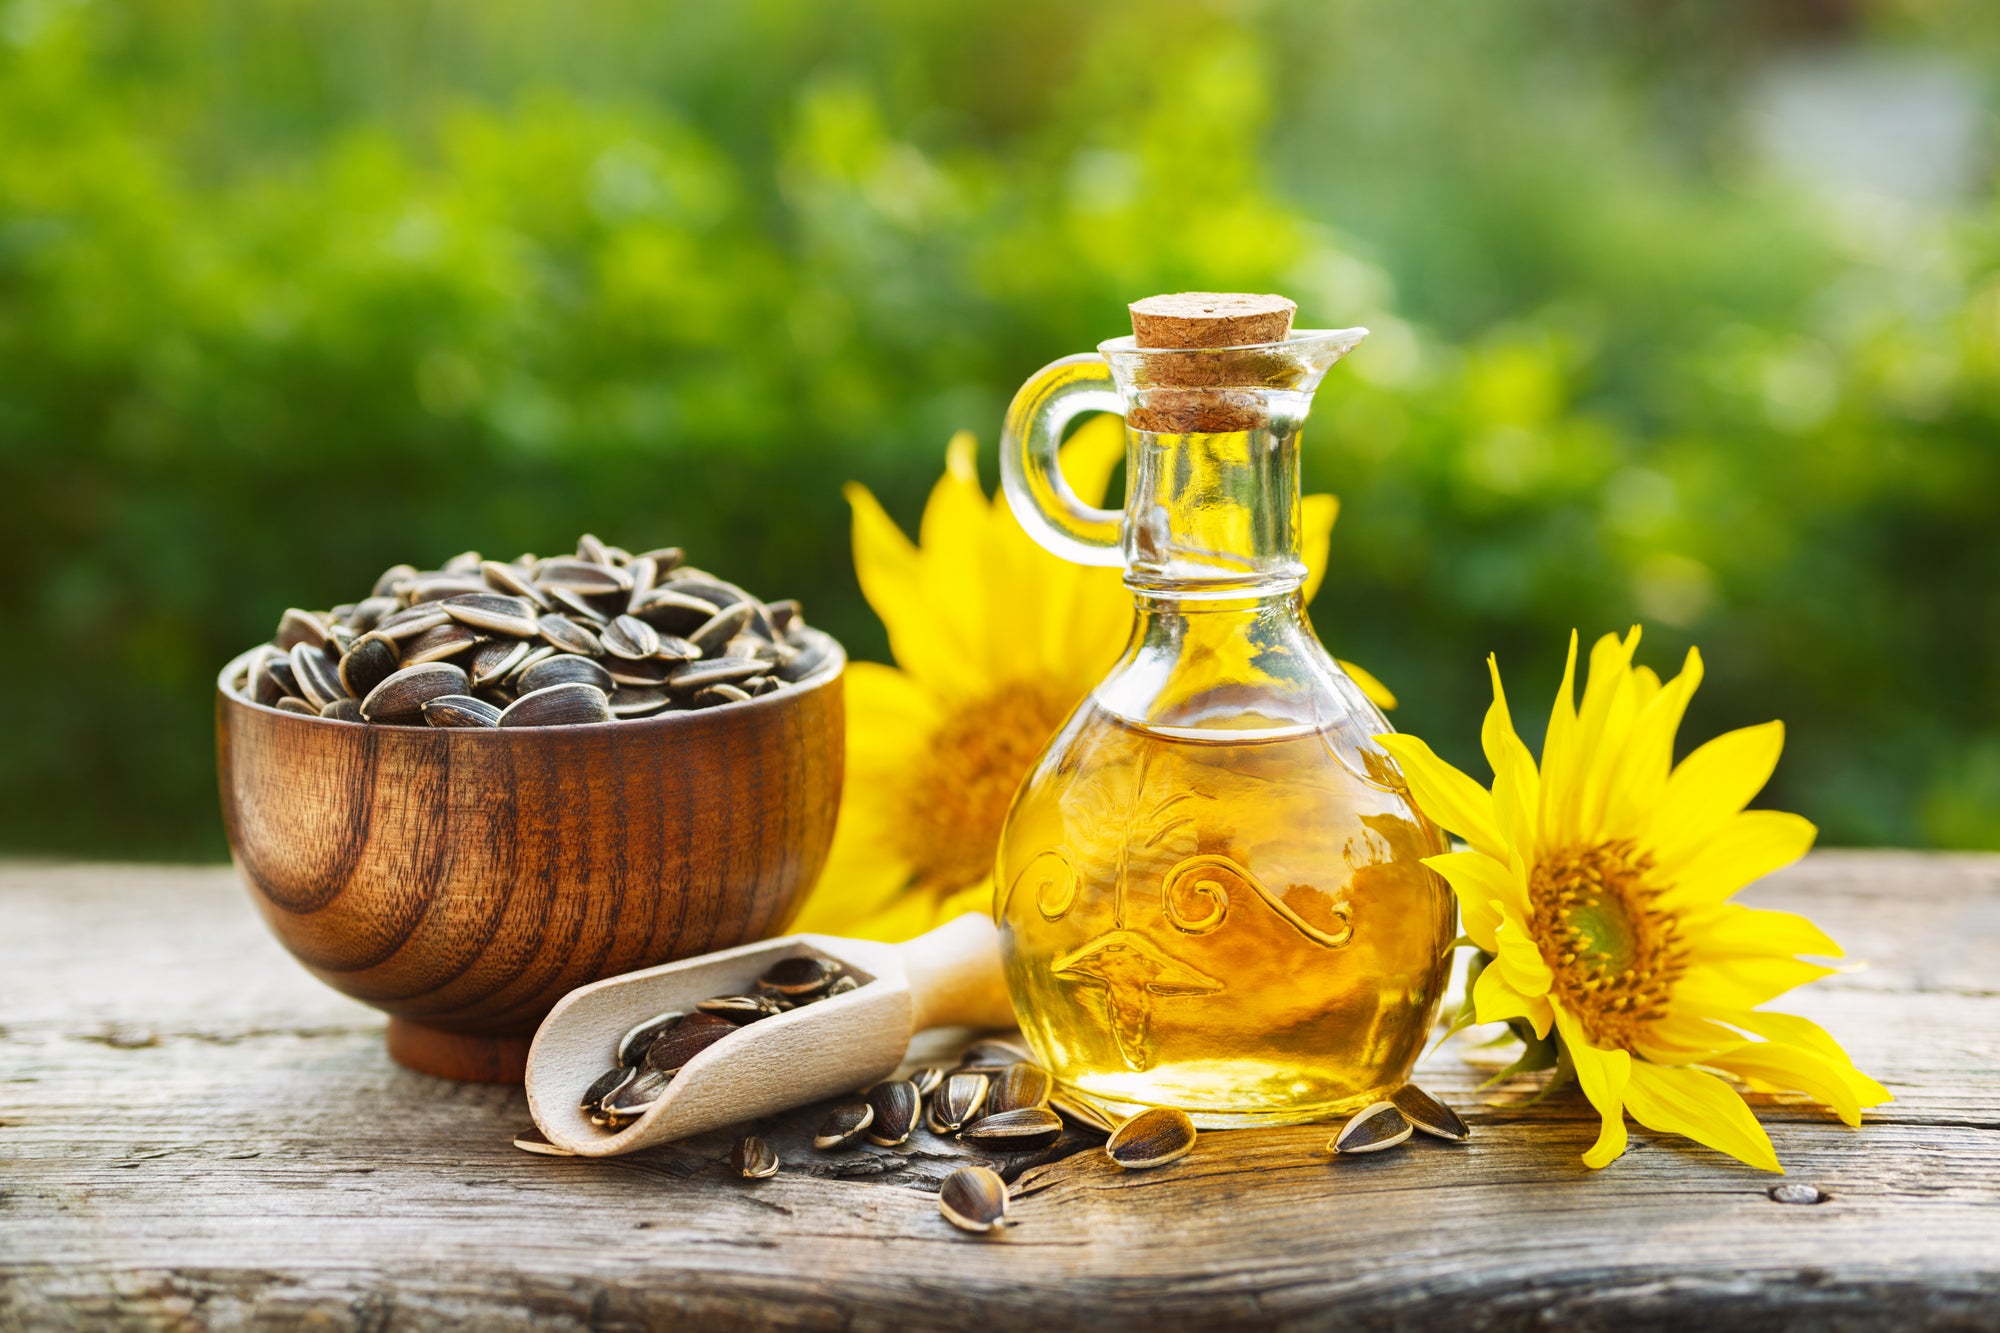 bottle of sunflower oil with vitamin e next to sunflowers and bowl of sunflower seeds